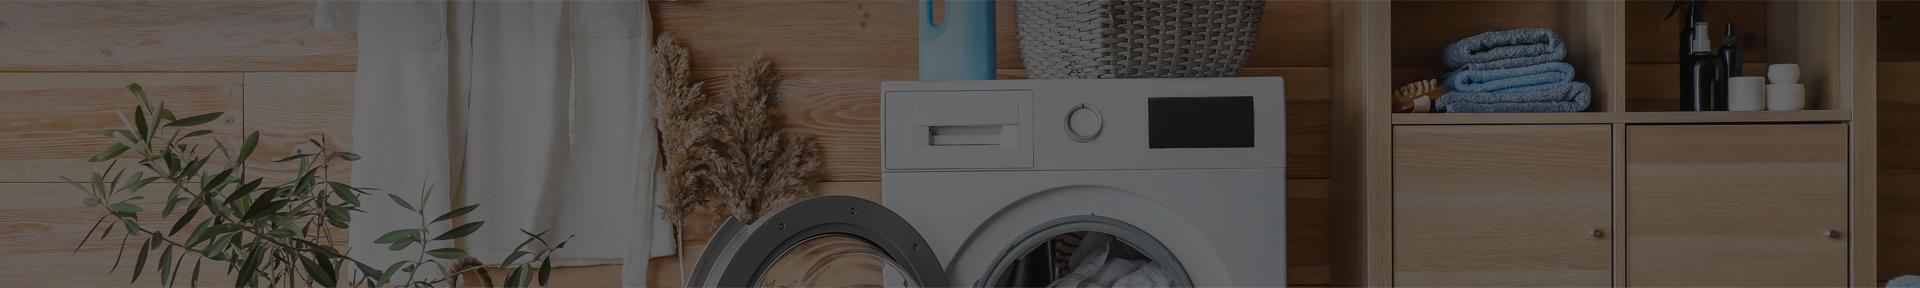 We offer the best commercial & restaurant laundry services nearby Auckland